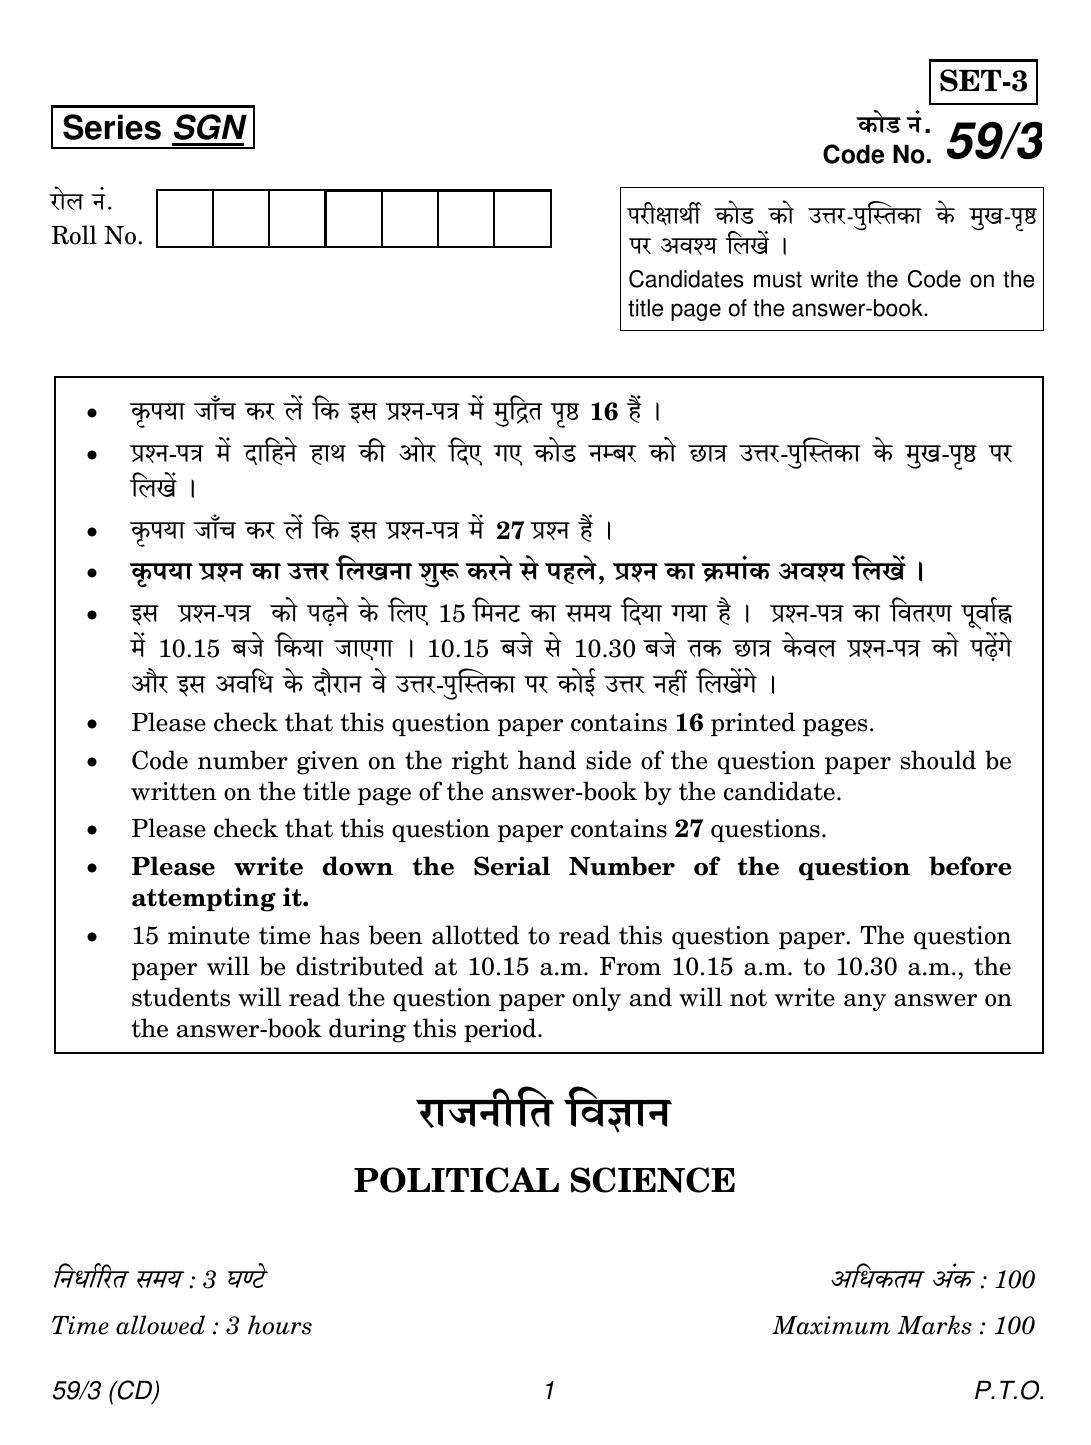 CBSE Class 12 59-3 POLITICAL SCIENCE CD 2018 Question Paper - Page 1